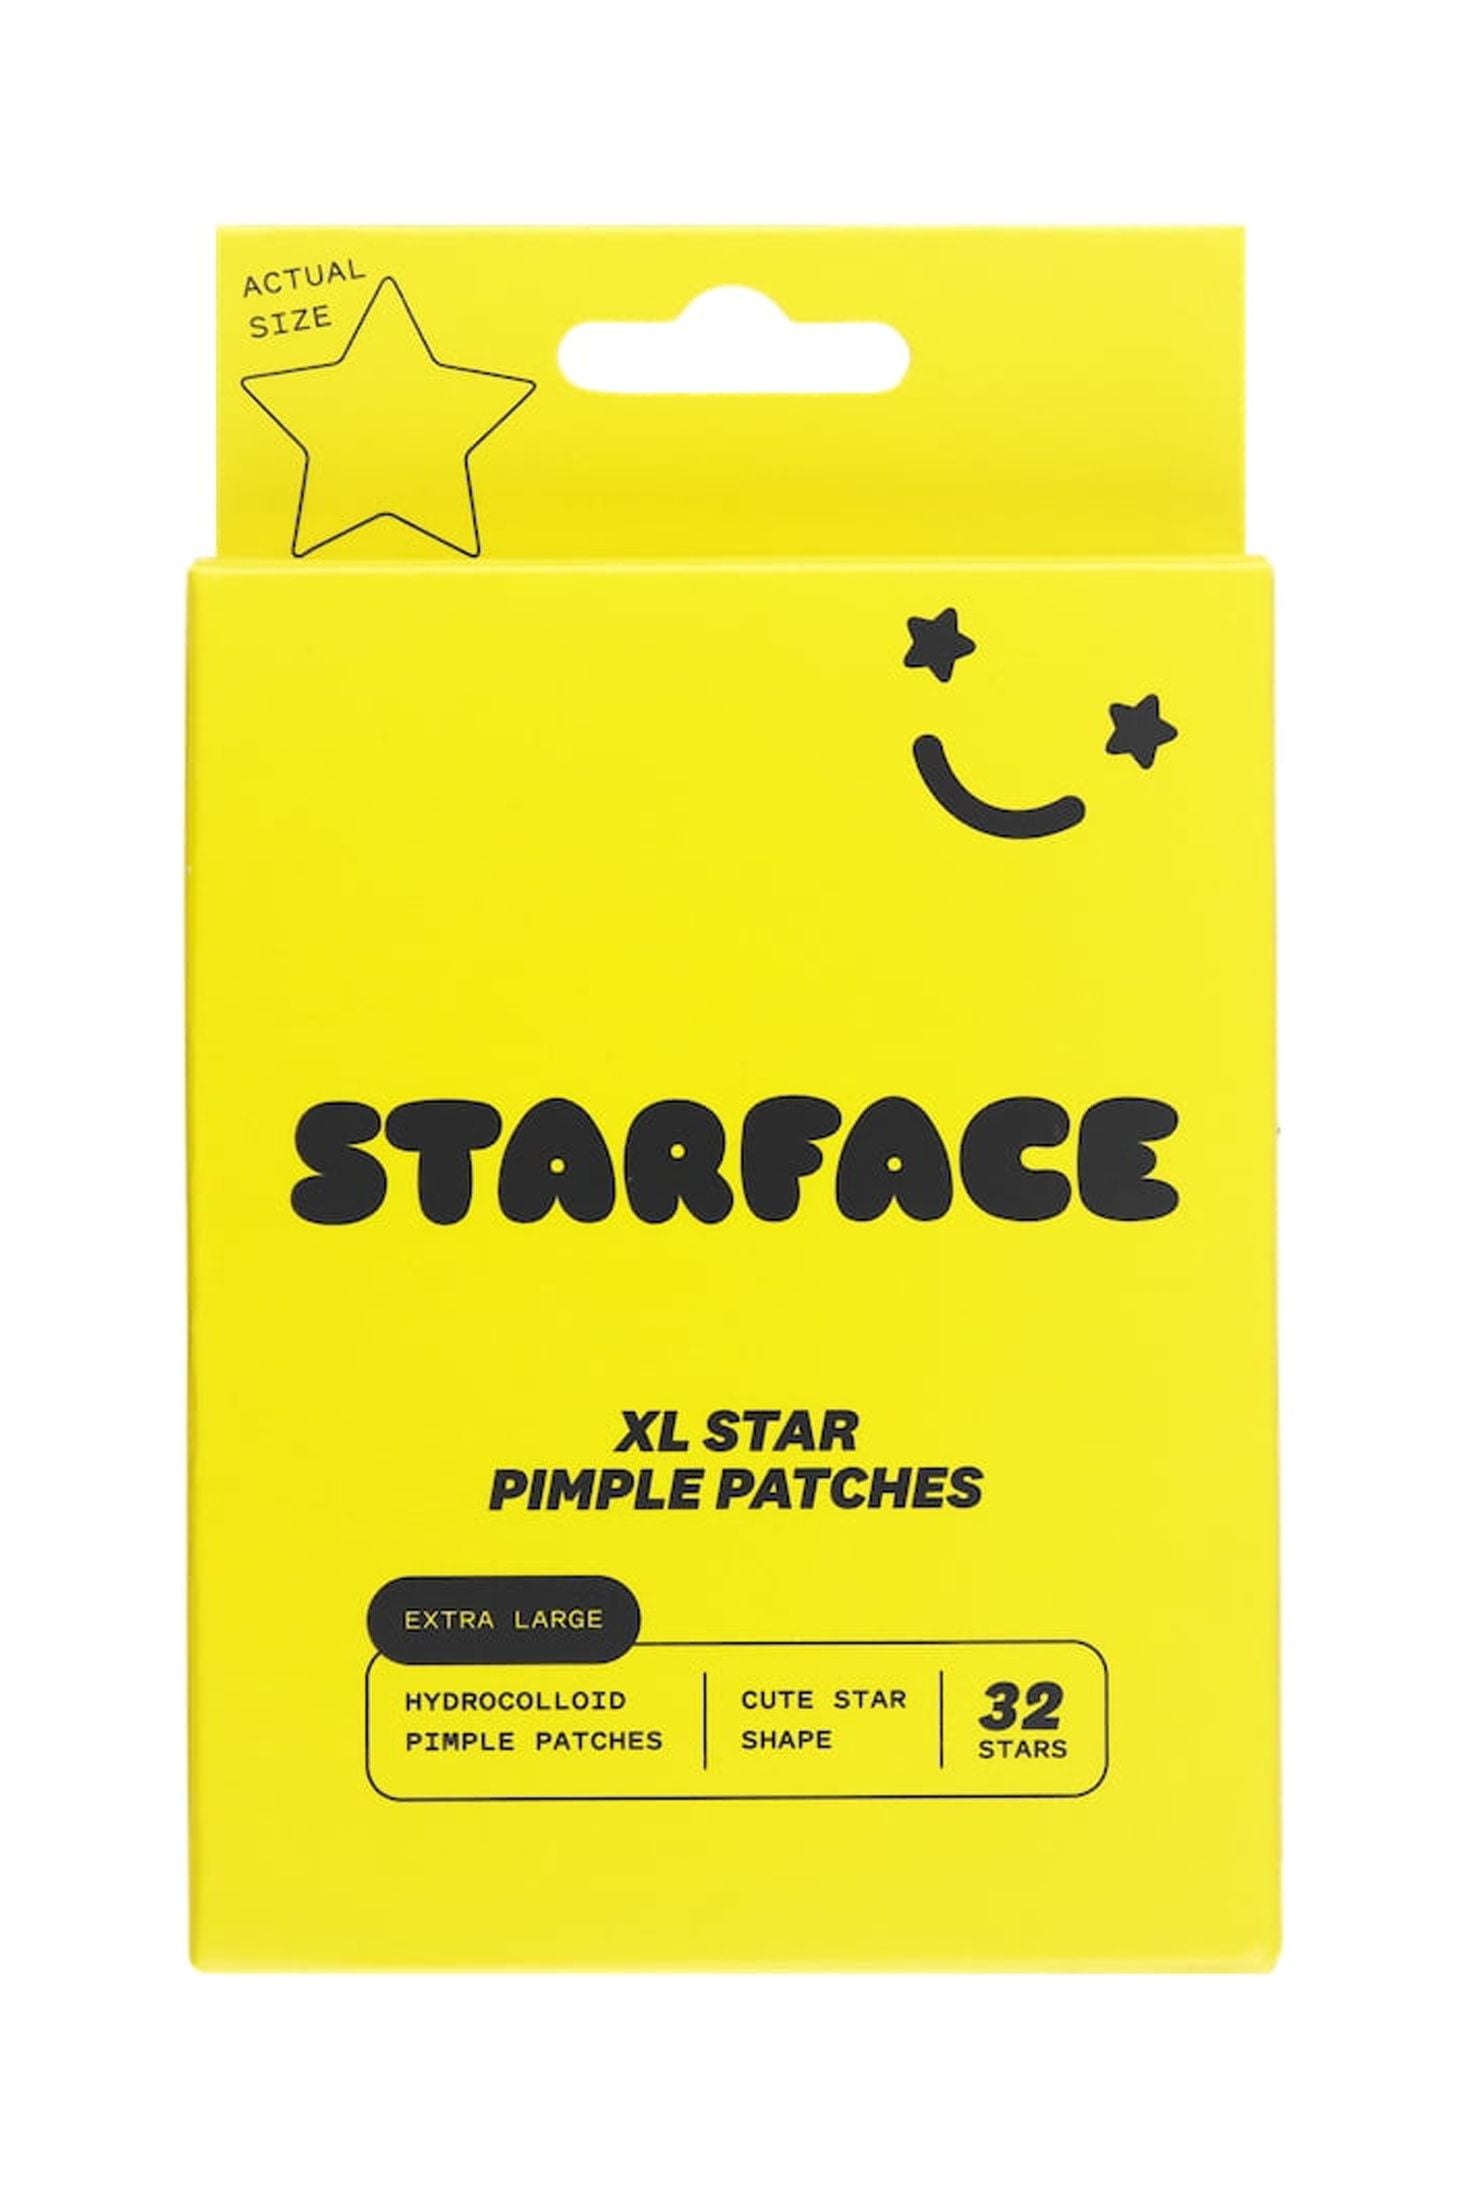 Starface Pimple Patches Are Available on